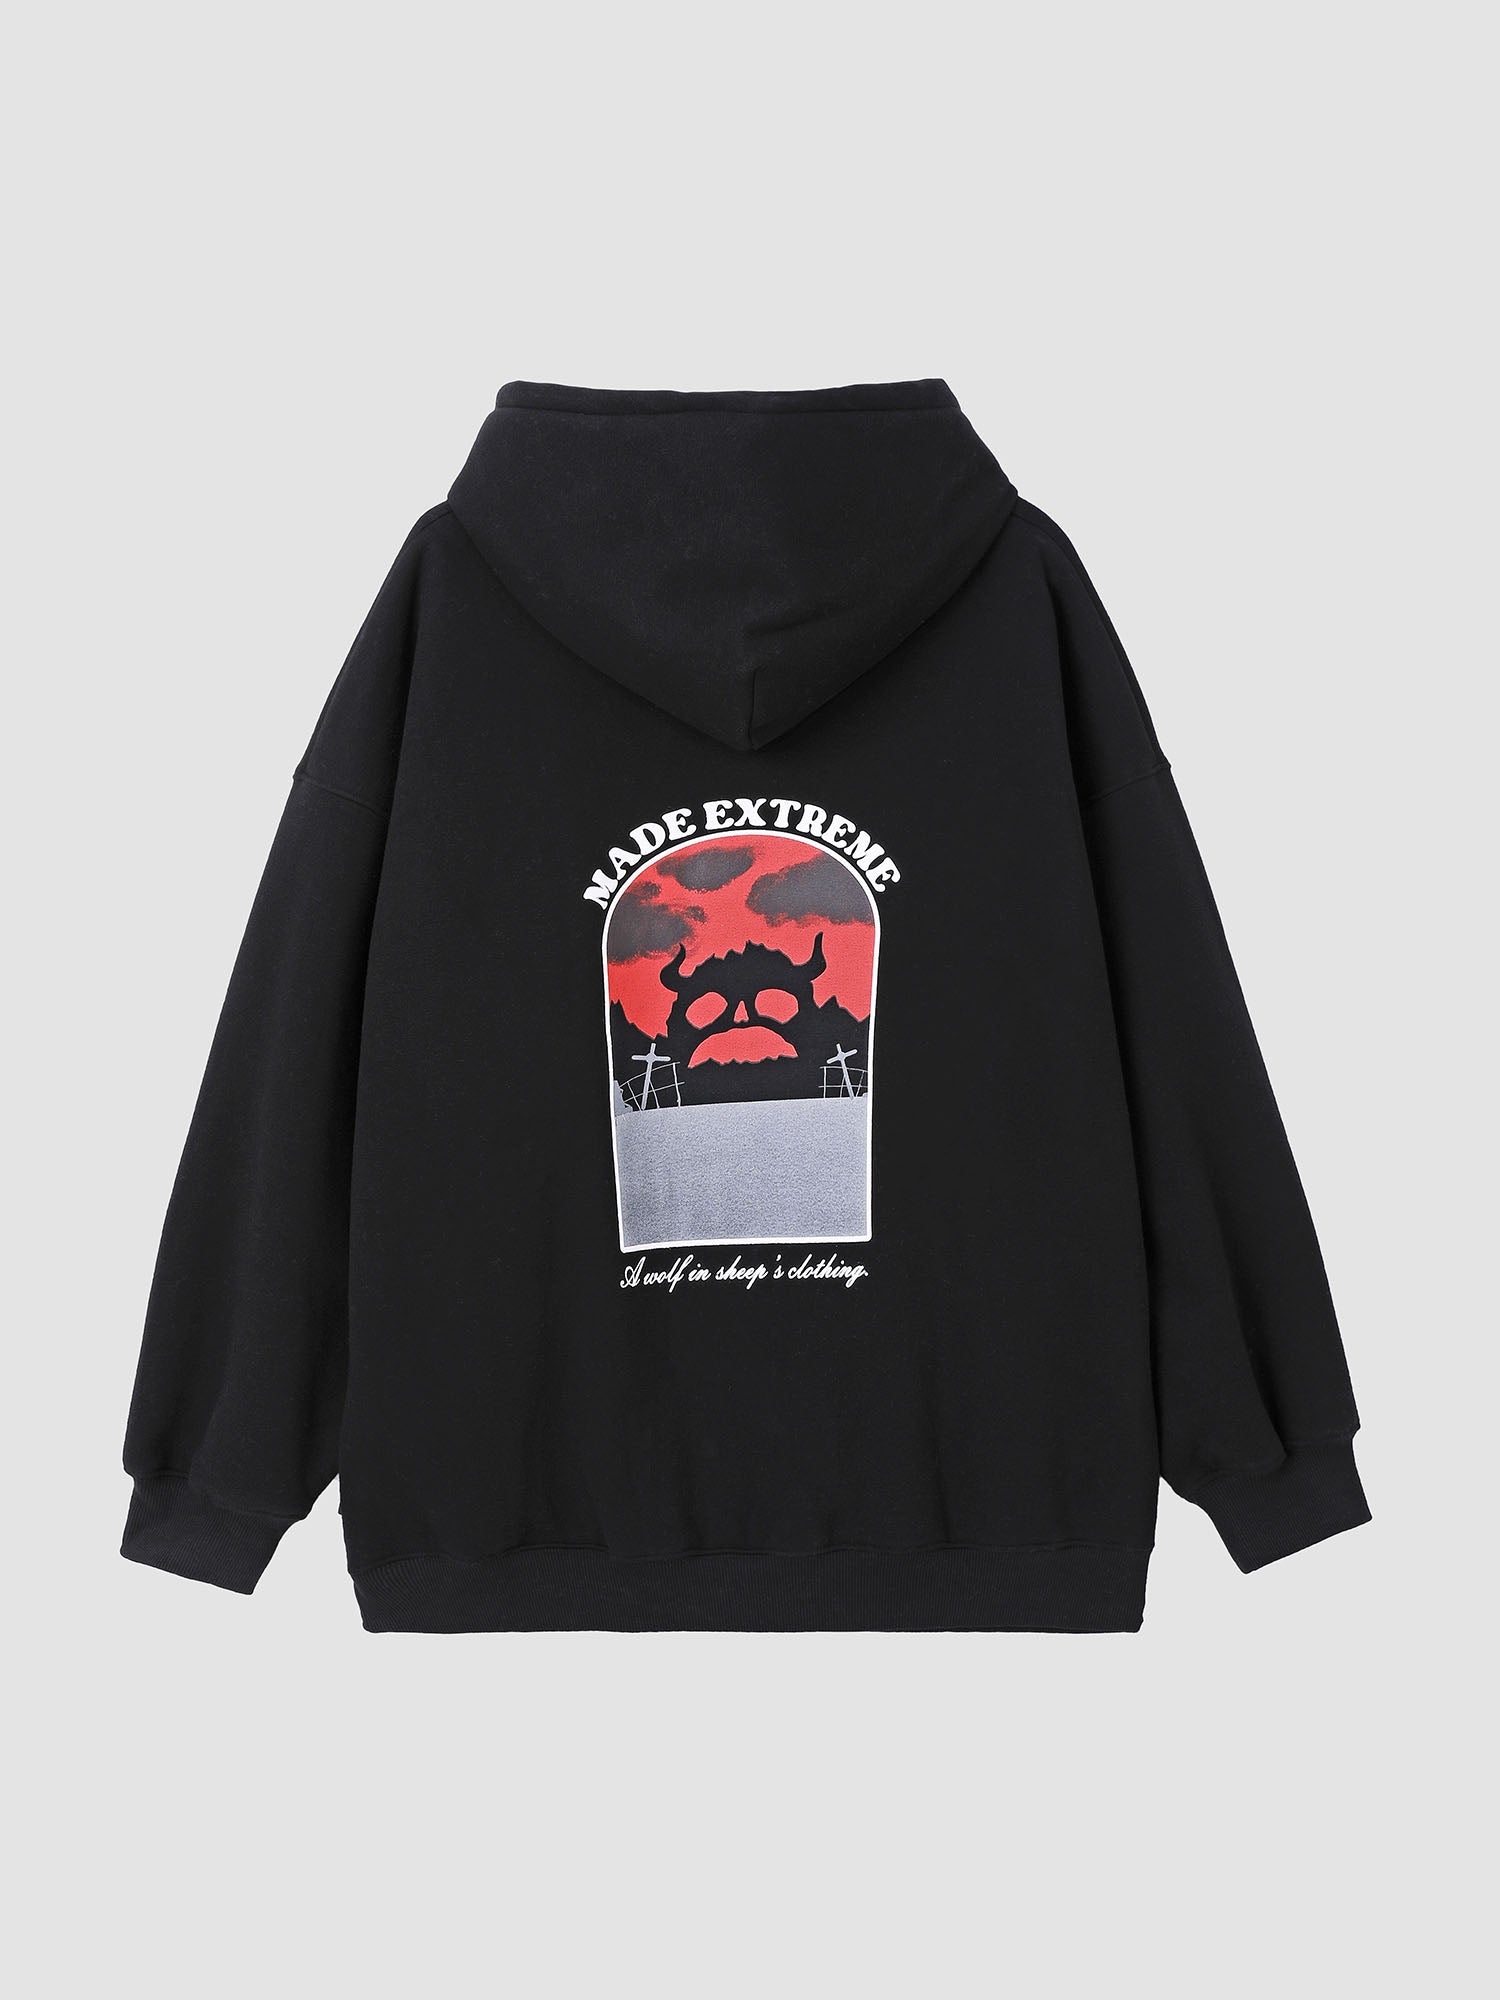 JUSTNOTAG Letter Print Polyester Hoodies